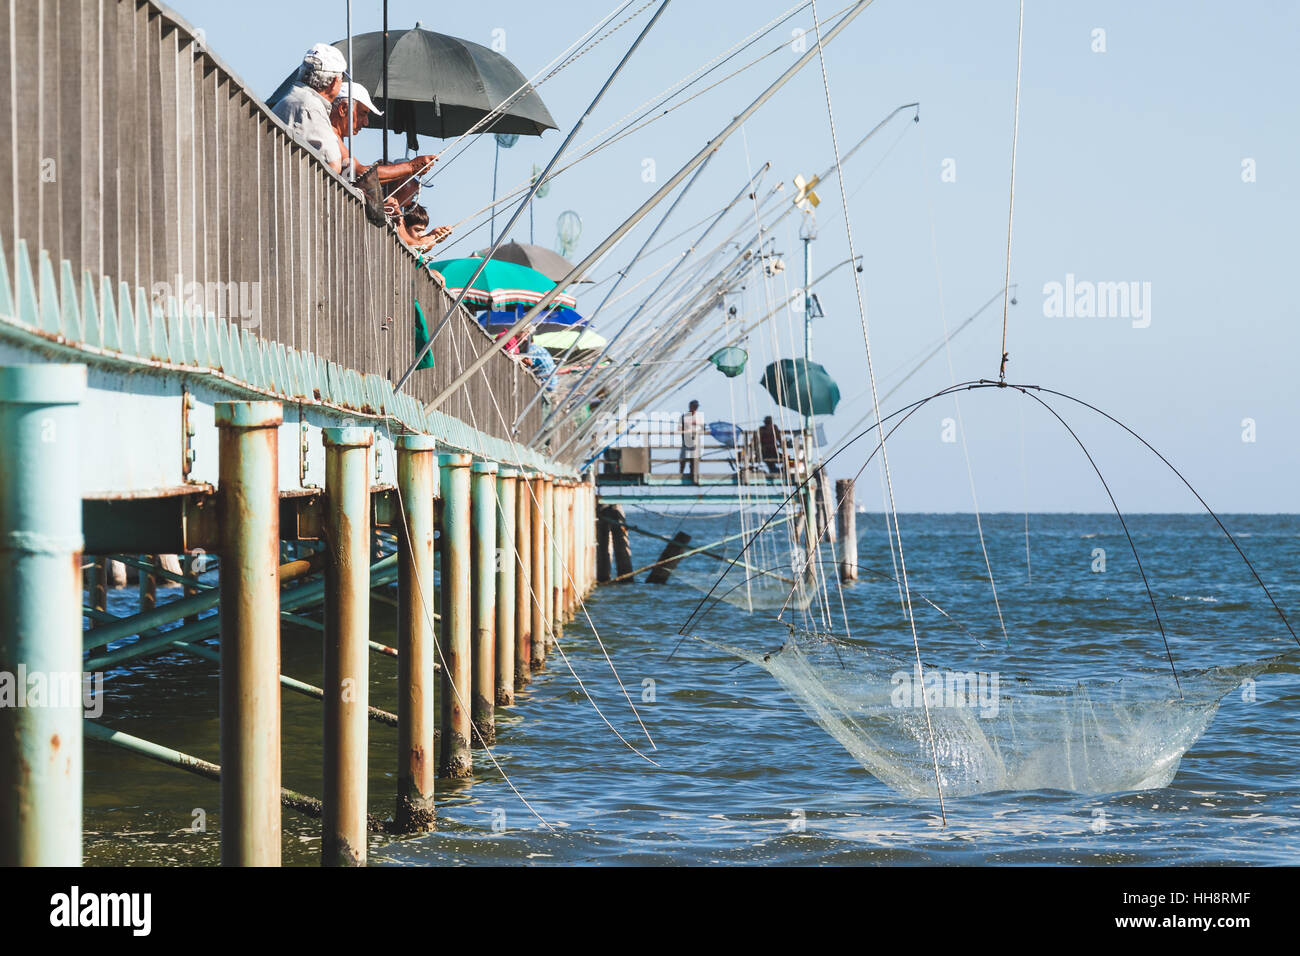 https://c8.alamy.com/comp/HH8RMF/fishing-from-the-pier-or-fishing-wharf-with-fishing-net-and-rod-at-HH8RMF.jpg